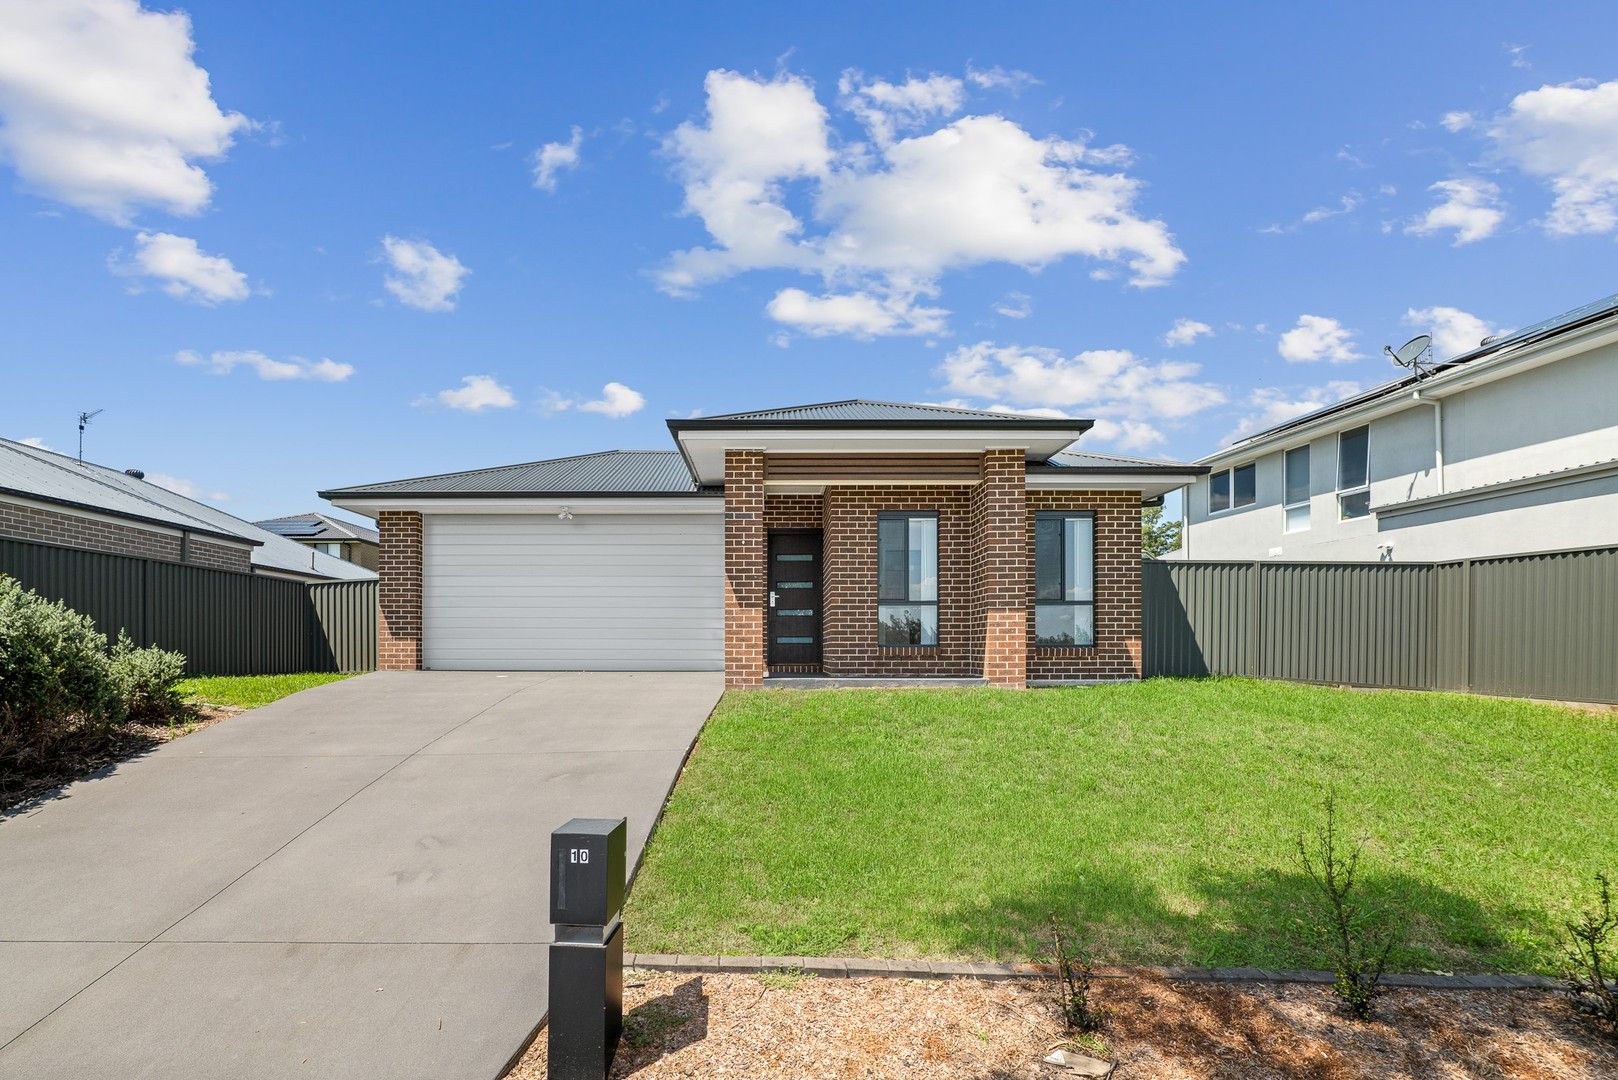 4 bedrooms House in 10 Milkhouse Drive RAYMOND TERRACE NSW, 2324